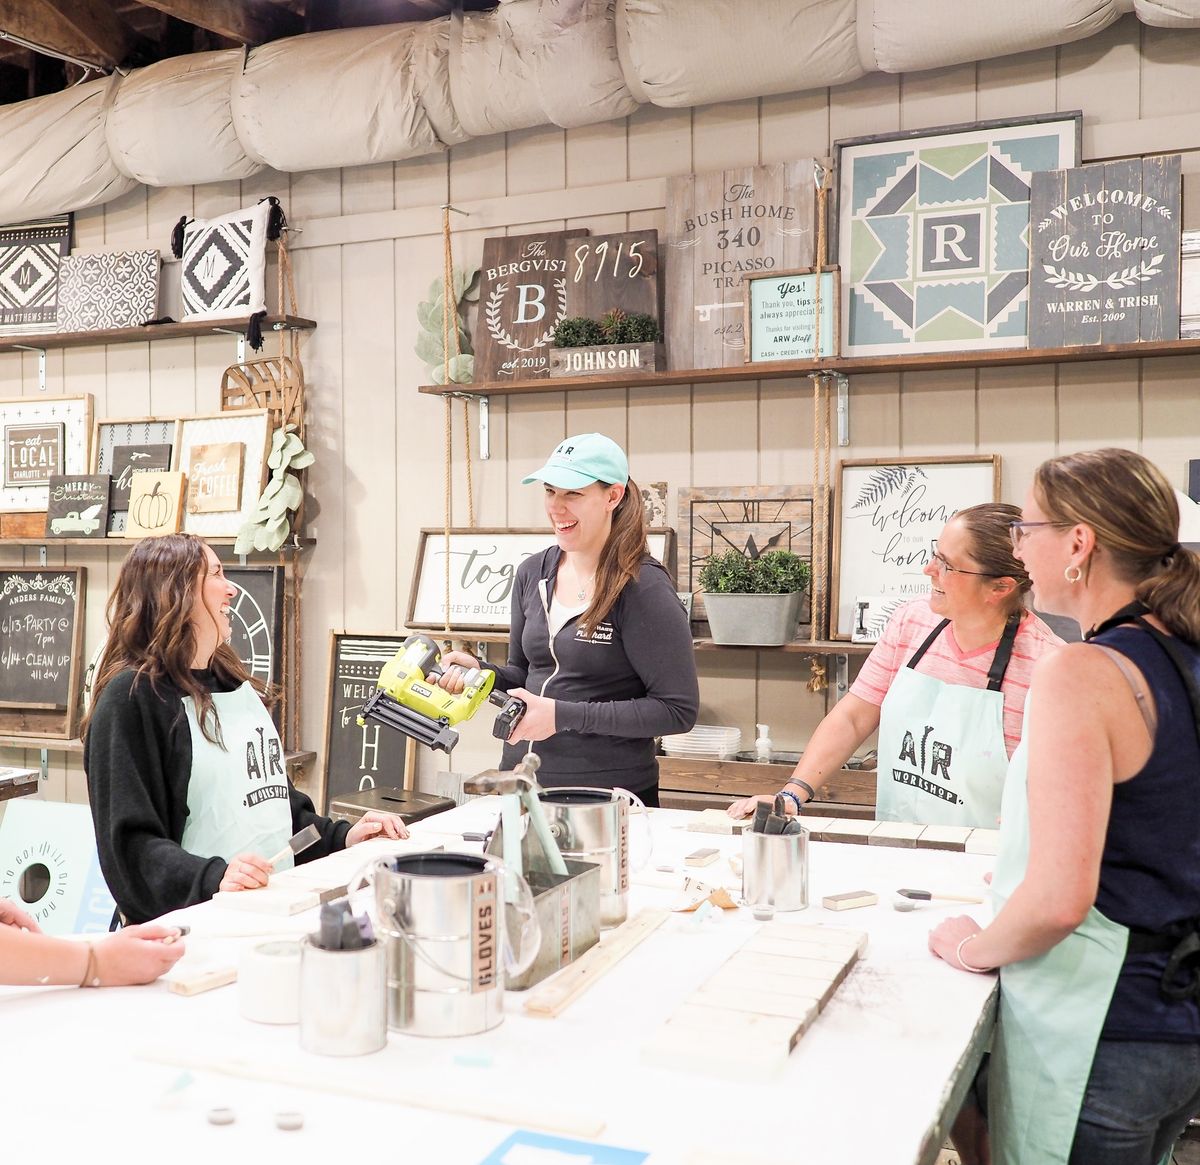 Unwind Wednesday - Pick Your Project! DIY Experience - Candle Pouring, Wood Signs, & More!